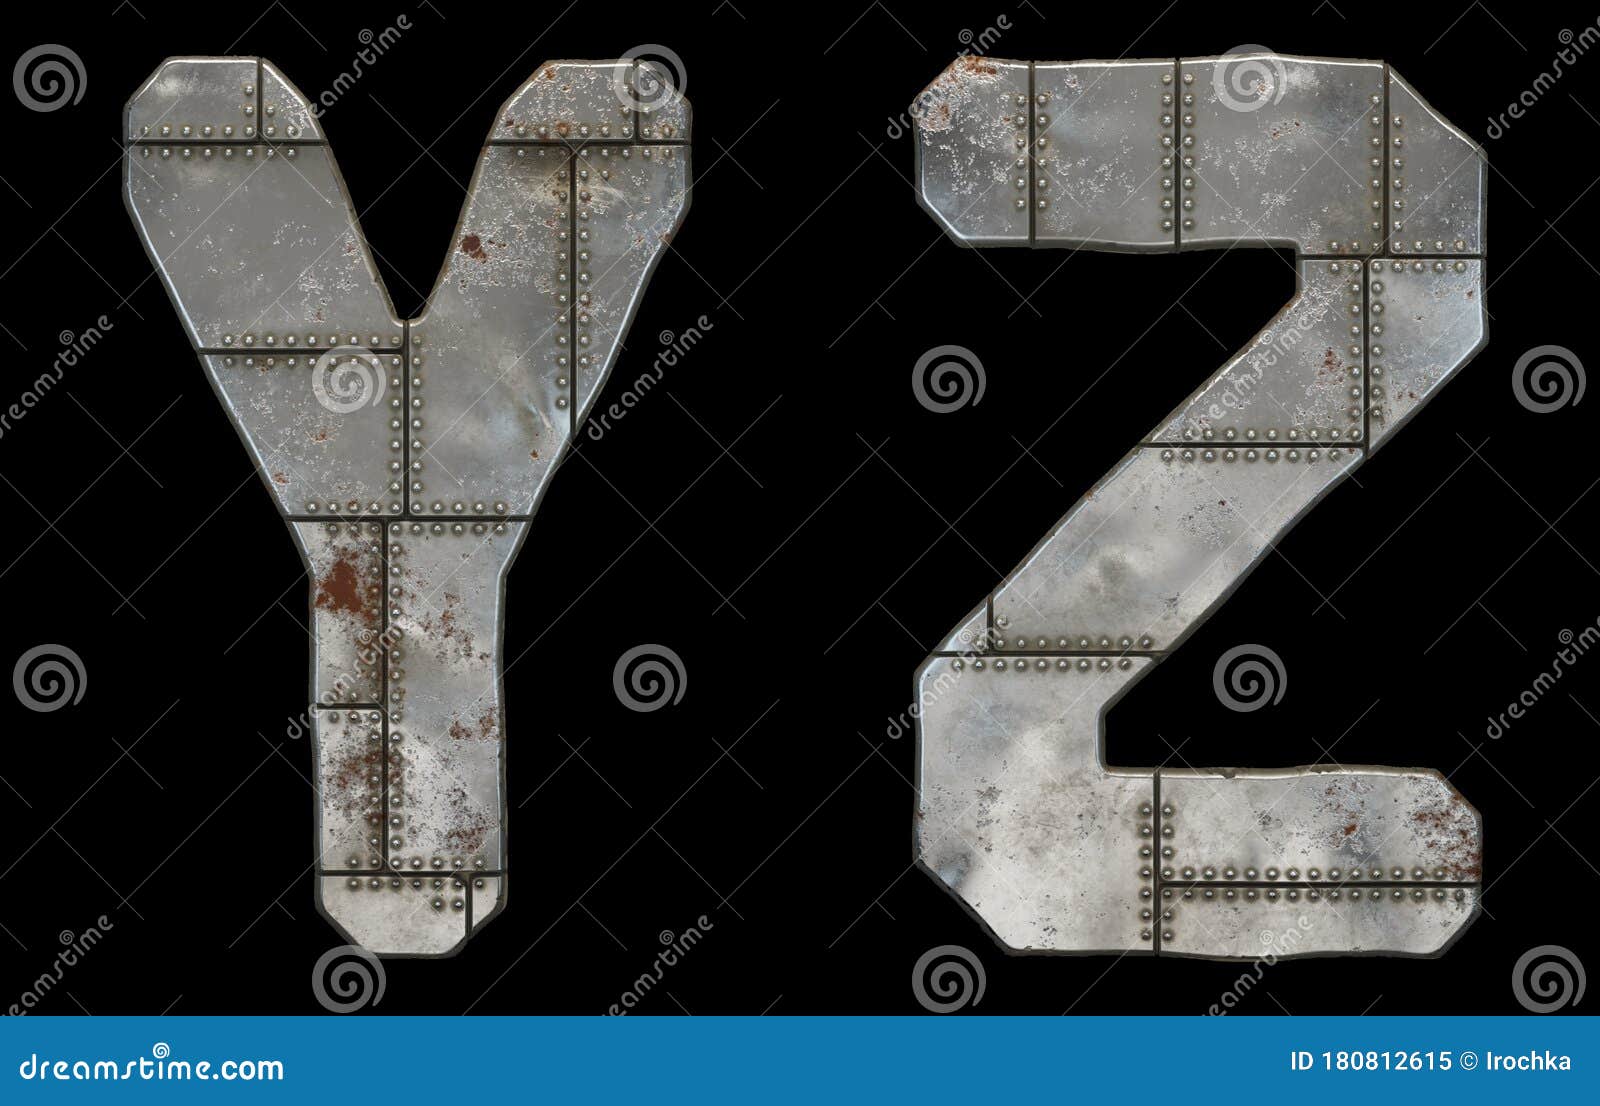 Set of Capital Letters Y and Z Made of Industrial Metal Isolated on ...